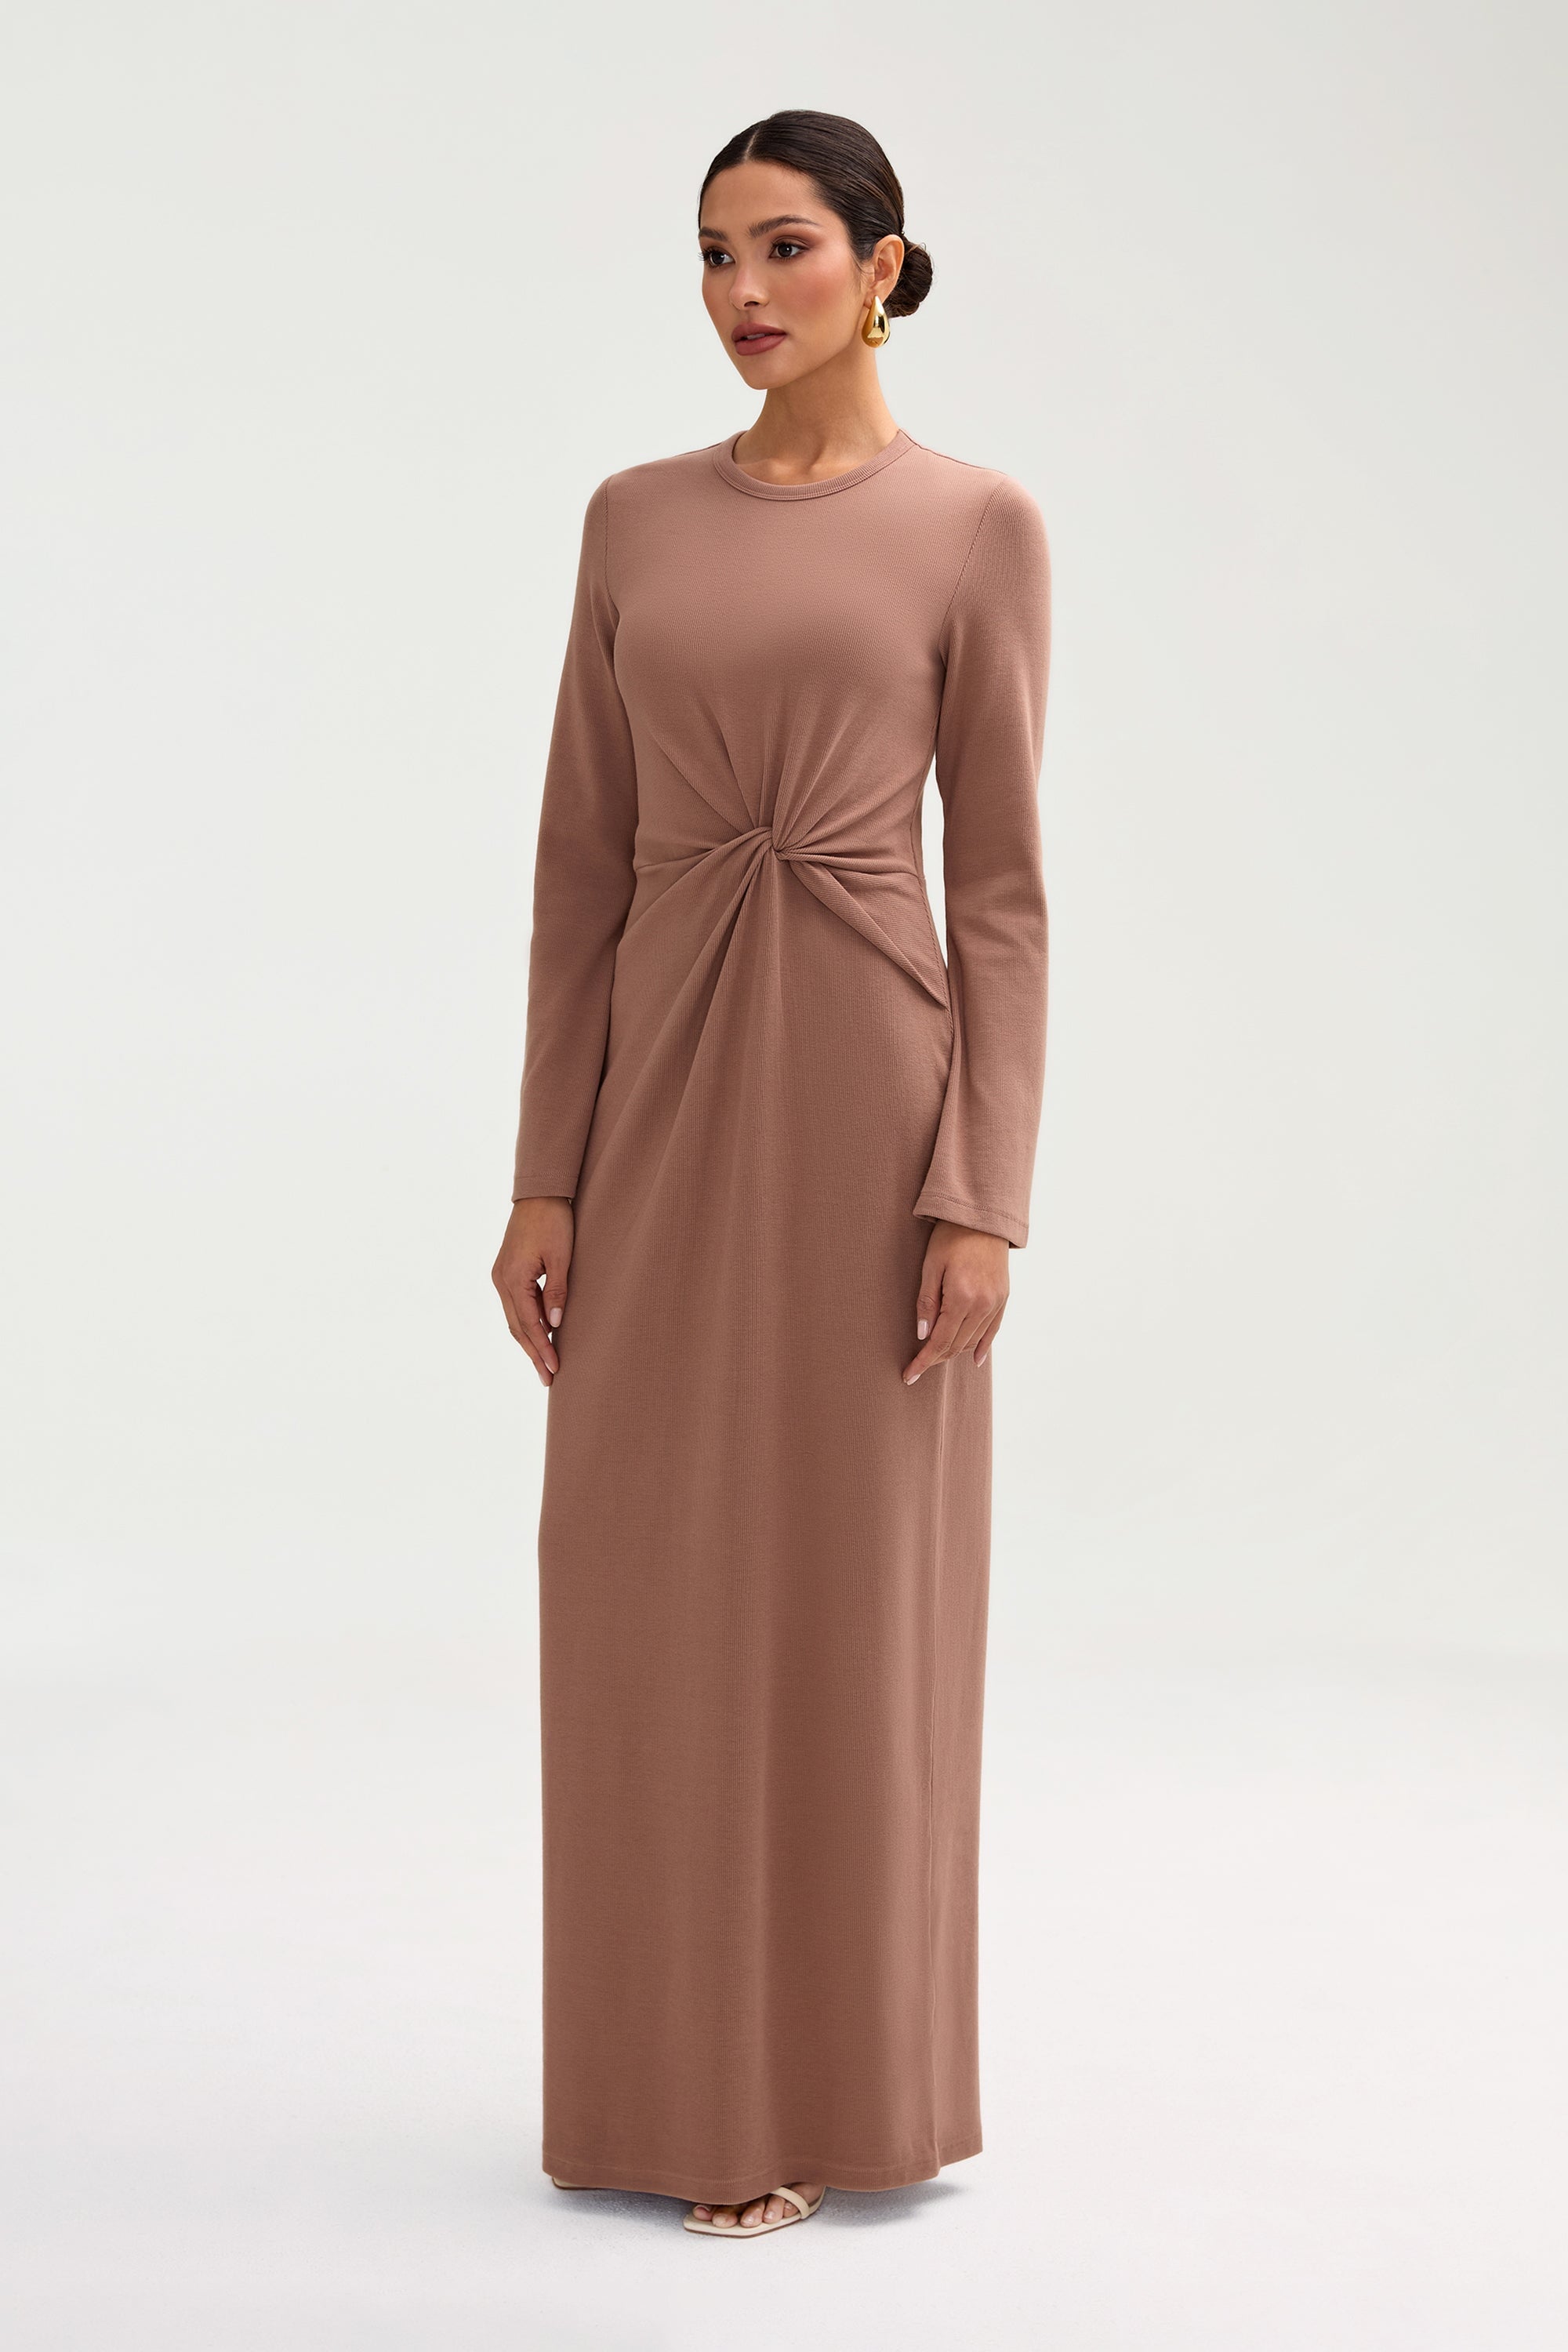 Aissia Ribbed Twist Front Maxi Dress - Brownie Clothing Veiled 